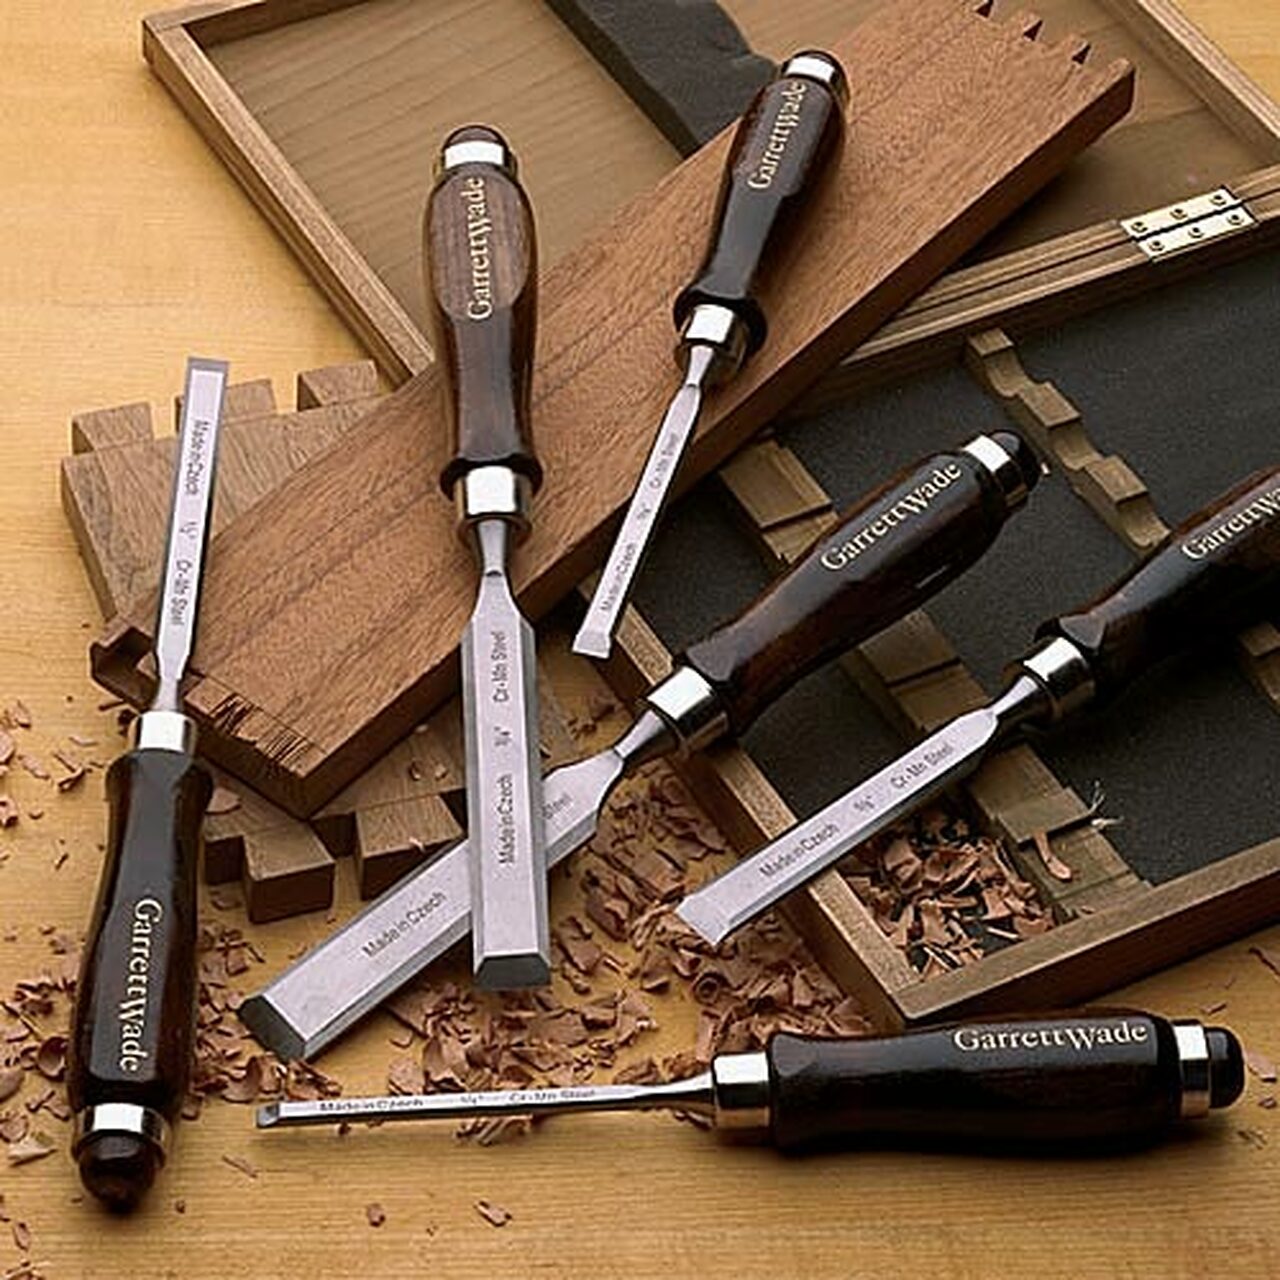 Woodworking tools DIY - Make it Creative with These Tools
